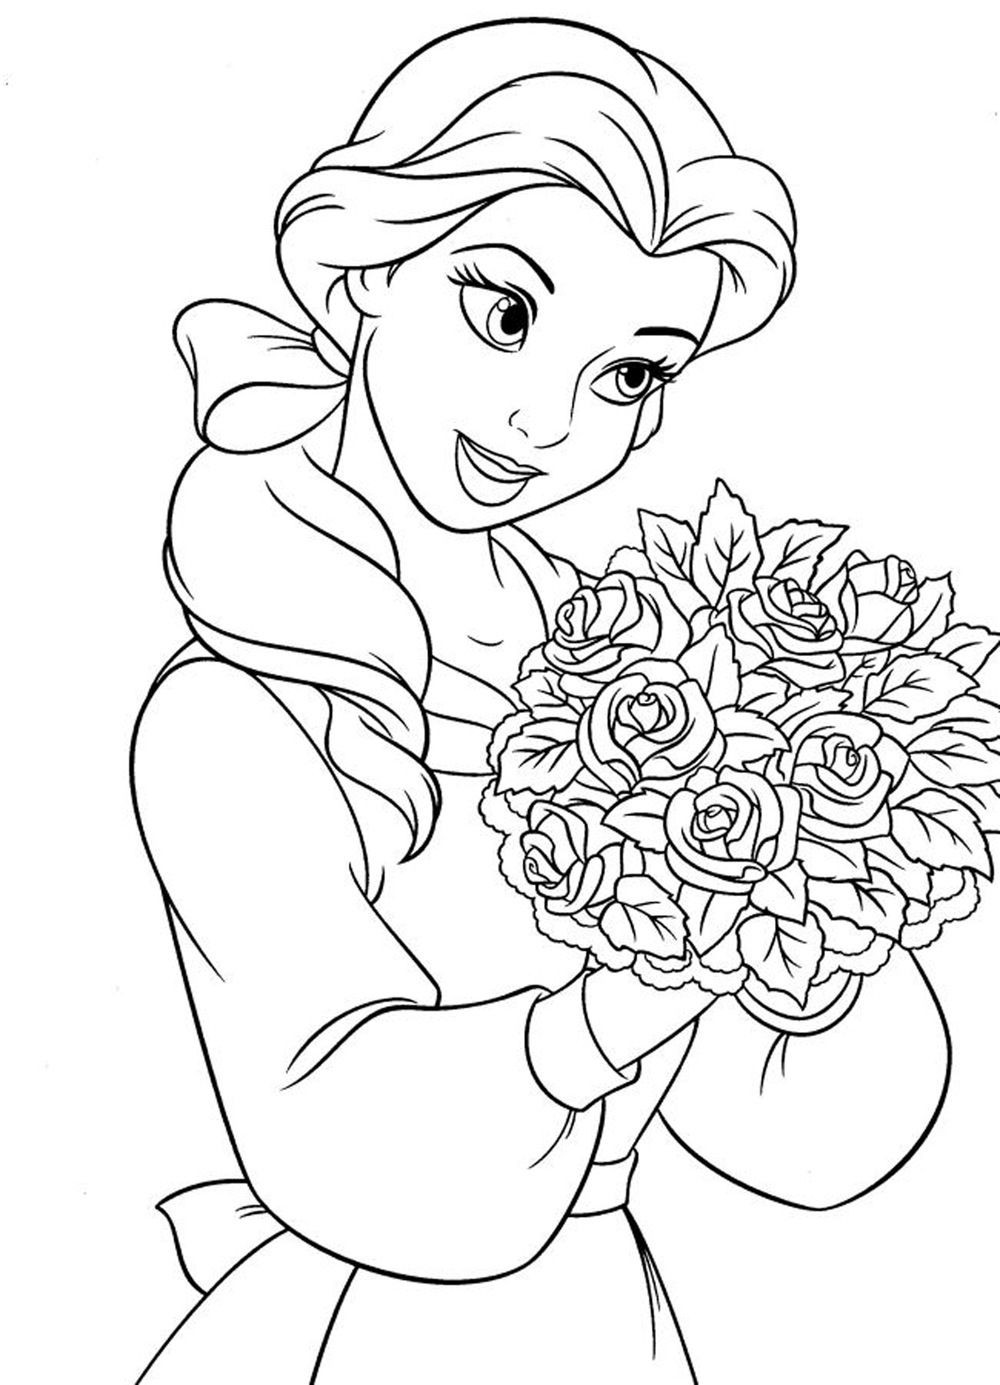 Best ideas about Printable Princess Coloring Pages For Girls
. Save or Pin princess coloring pages for girls Free Now.